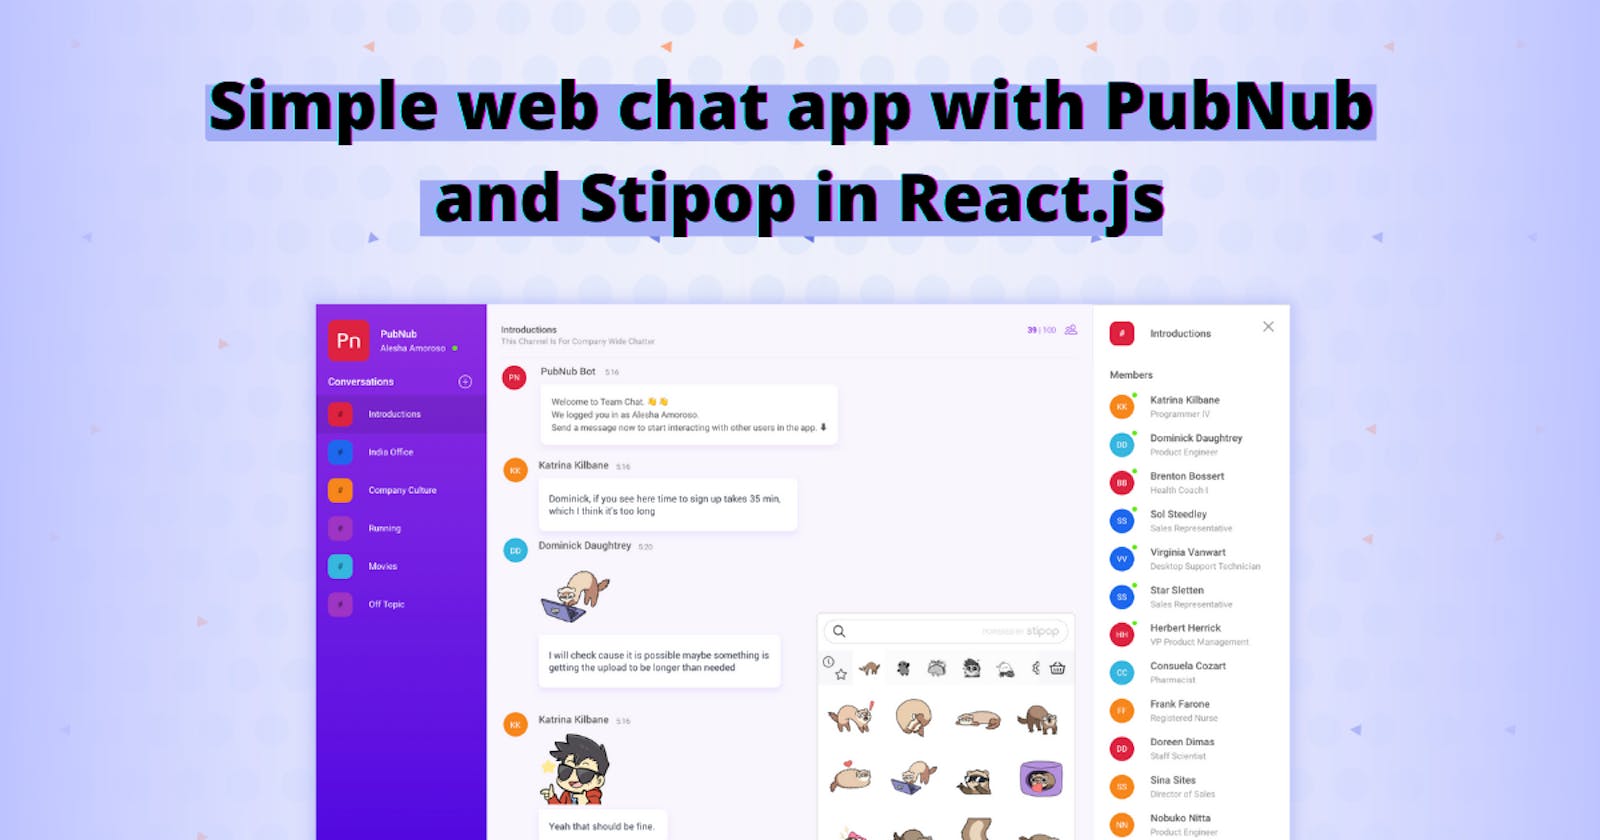 Simple web chat app with PubNub and Stipop in React.js